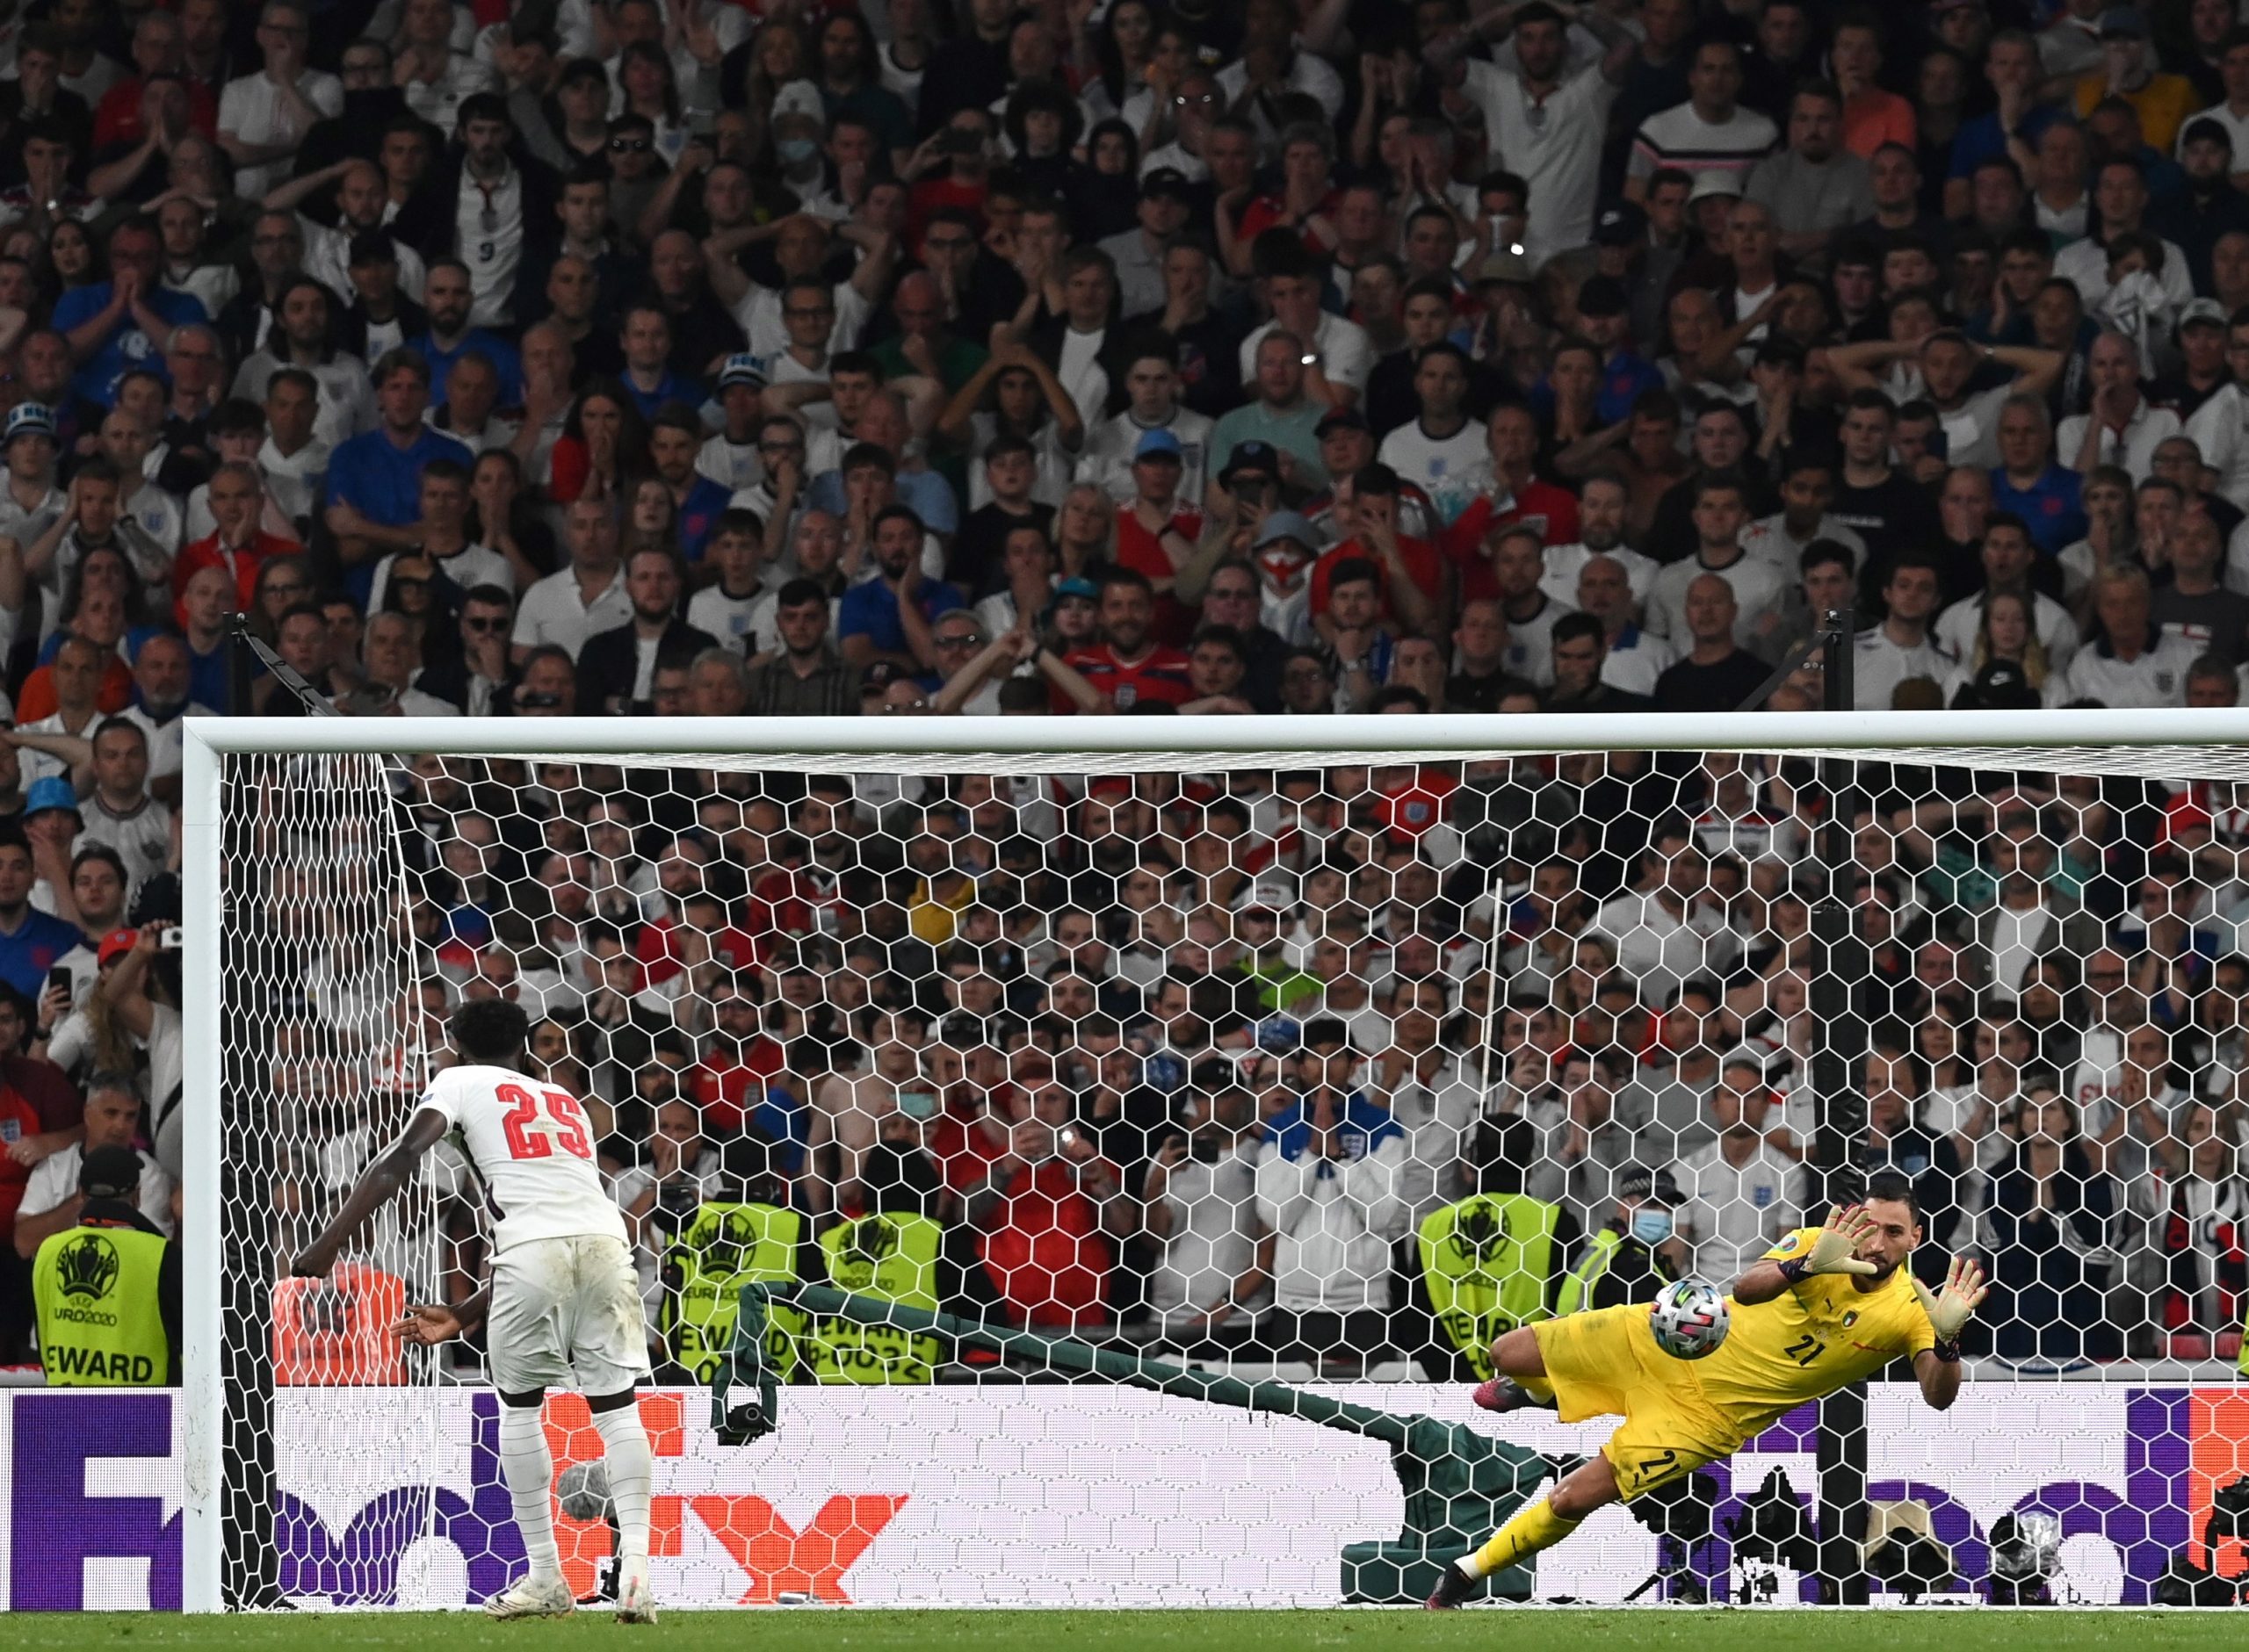 epa09338853 Goalkeeper Gianluigi Donnarumma of Italy saves the penalty of Bukayo Saka of England during the penalty shoot-out of the UEFA EURO 2020 final between Italy and England in London, Britain, 11 July 2021.  EPA/Carl Recine / POOL (RESTRICTIONS: For editorial news reporting purposes only. Images must appear as still images and must not emulate match action video footage. Photographs published in online publications shall have an interval of at least 20 seconds between the posting.)